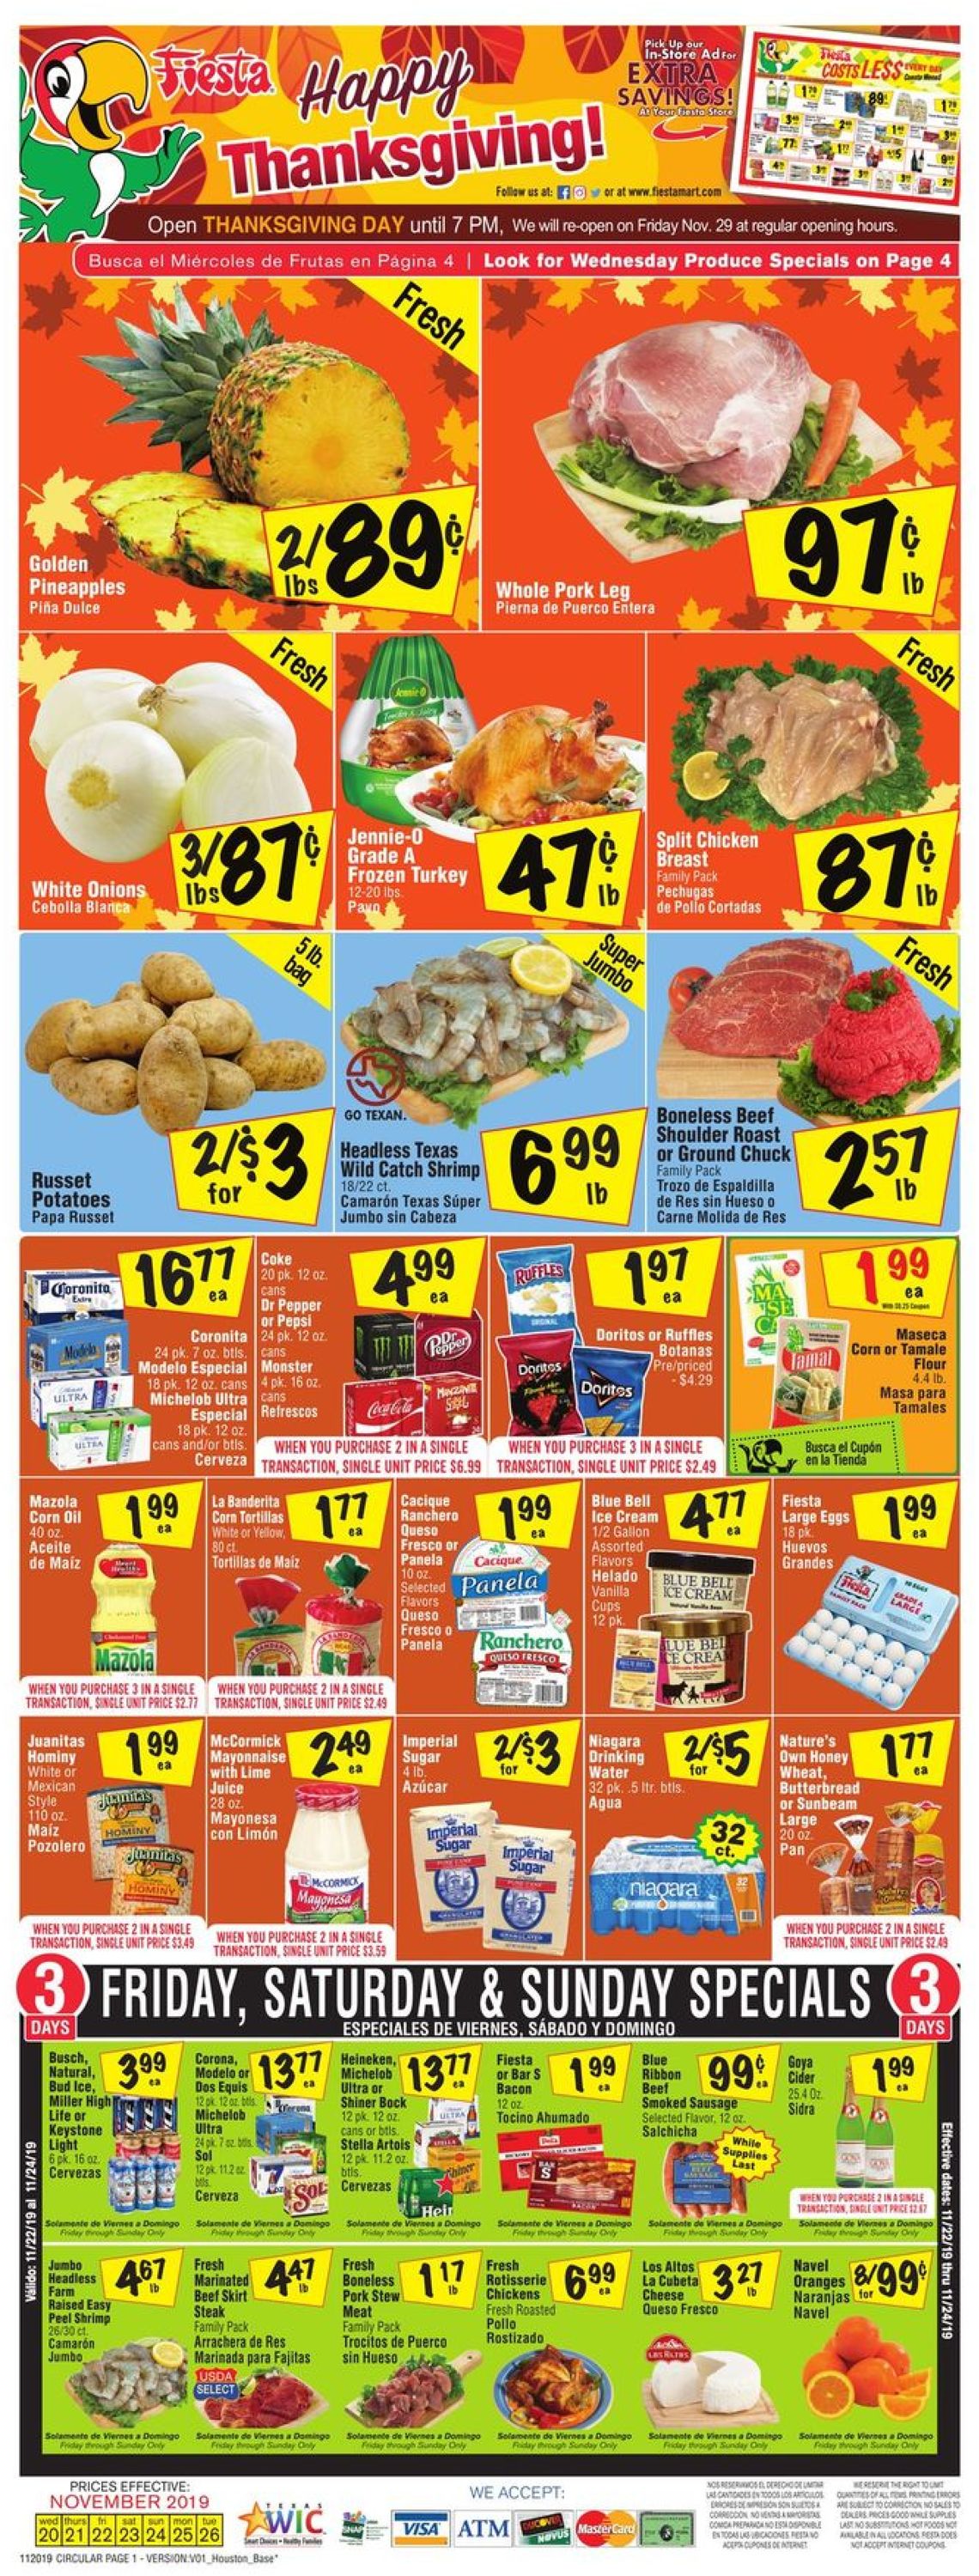 Fiesta Mart - Thanksgiving Ad 2019 Current weekly ad 11/20 - 11/26/2019 ...